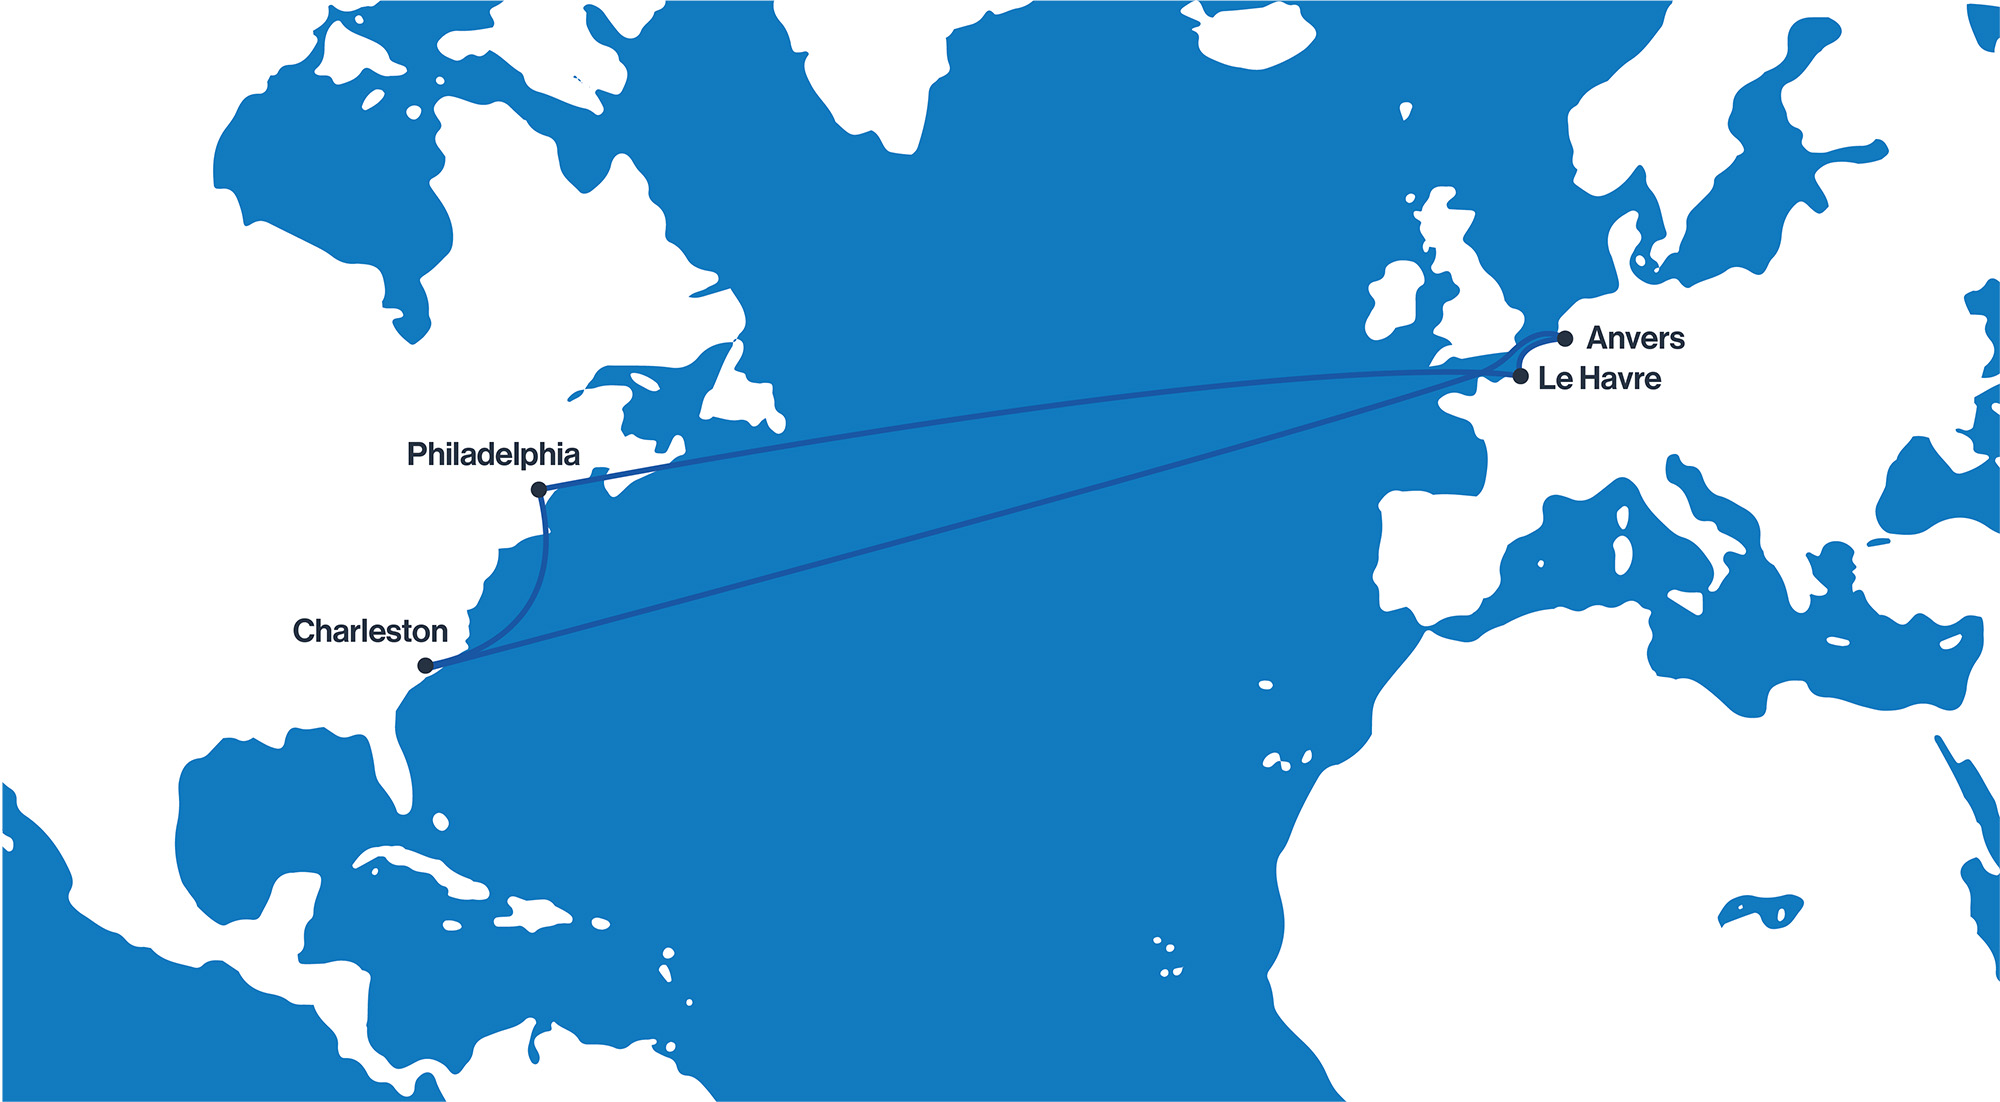 Map of Zephyr et Borée's shipping routes: Anvers and Le Havre, and Geneva, to Philadelphia and Charleston.